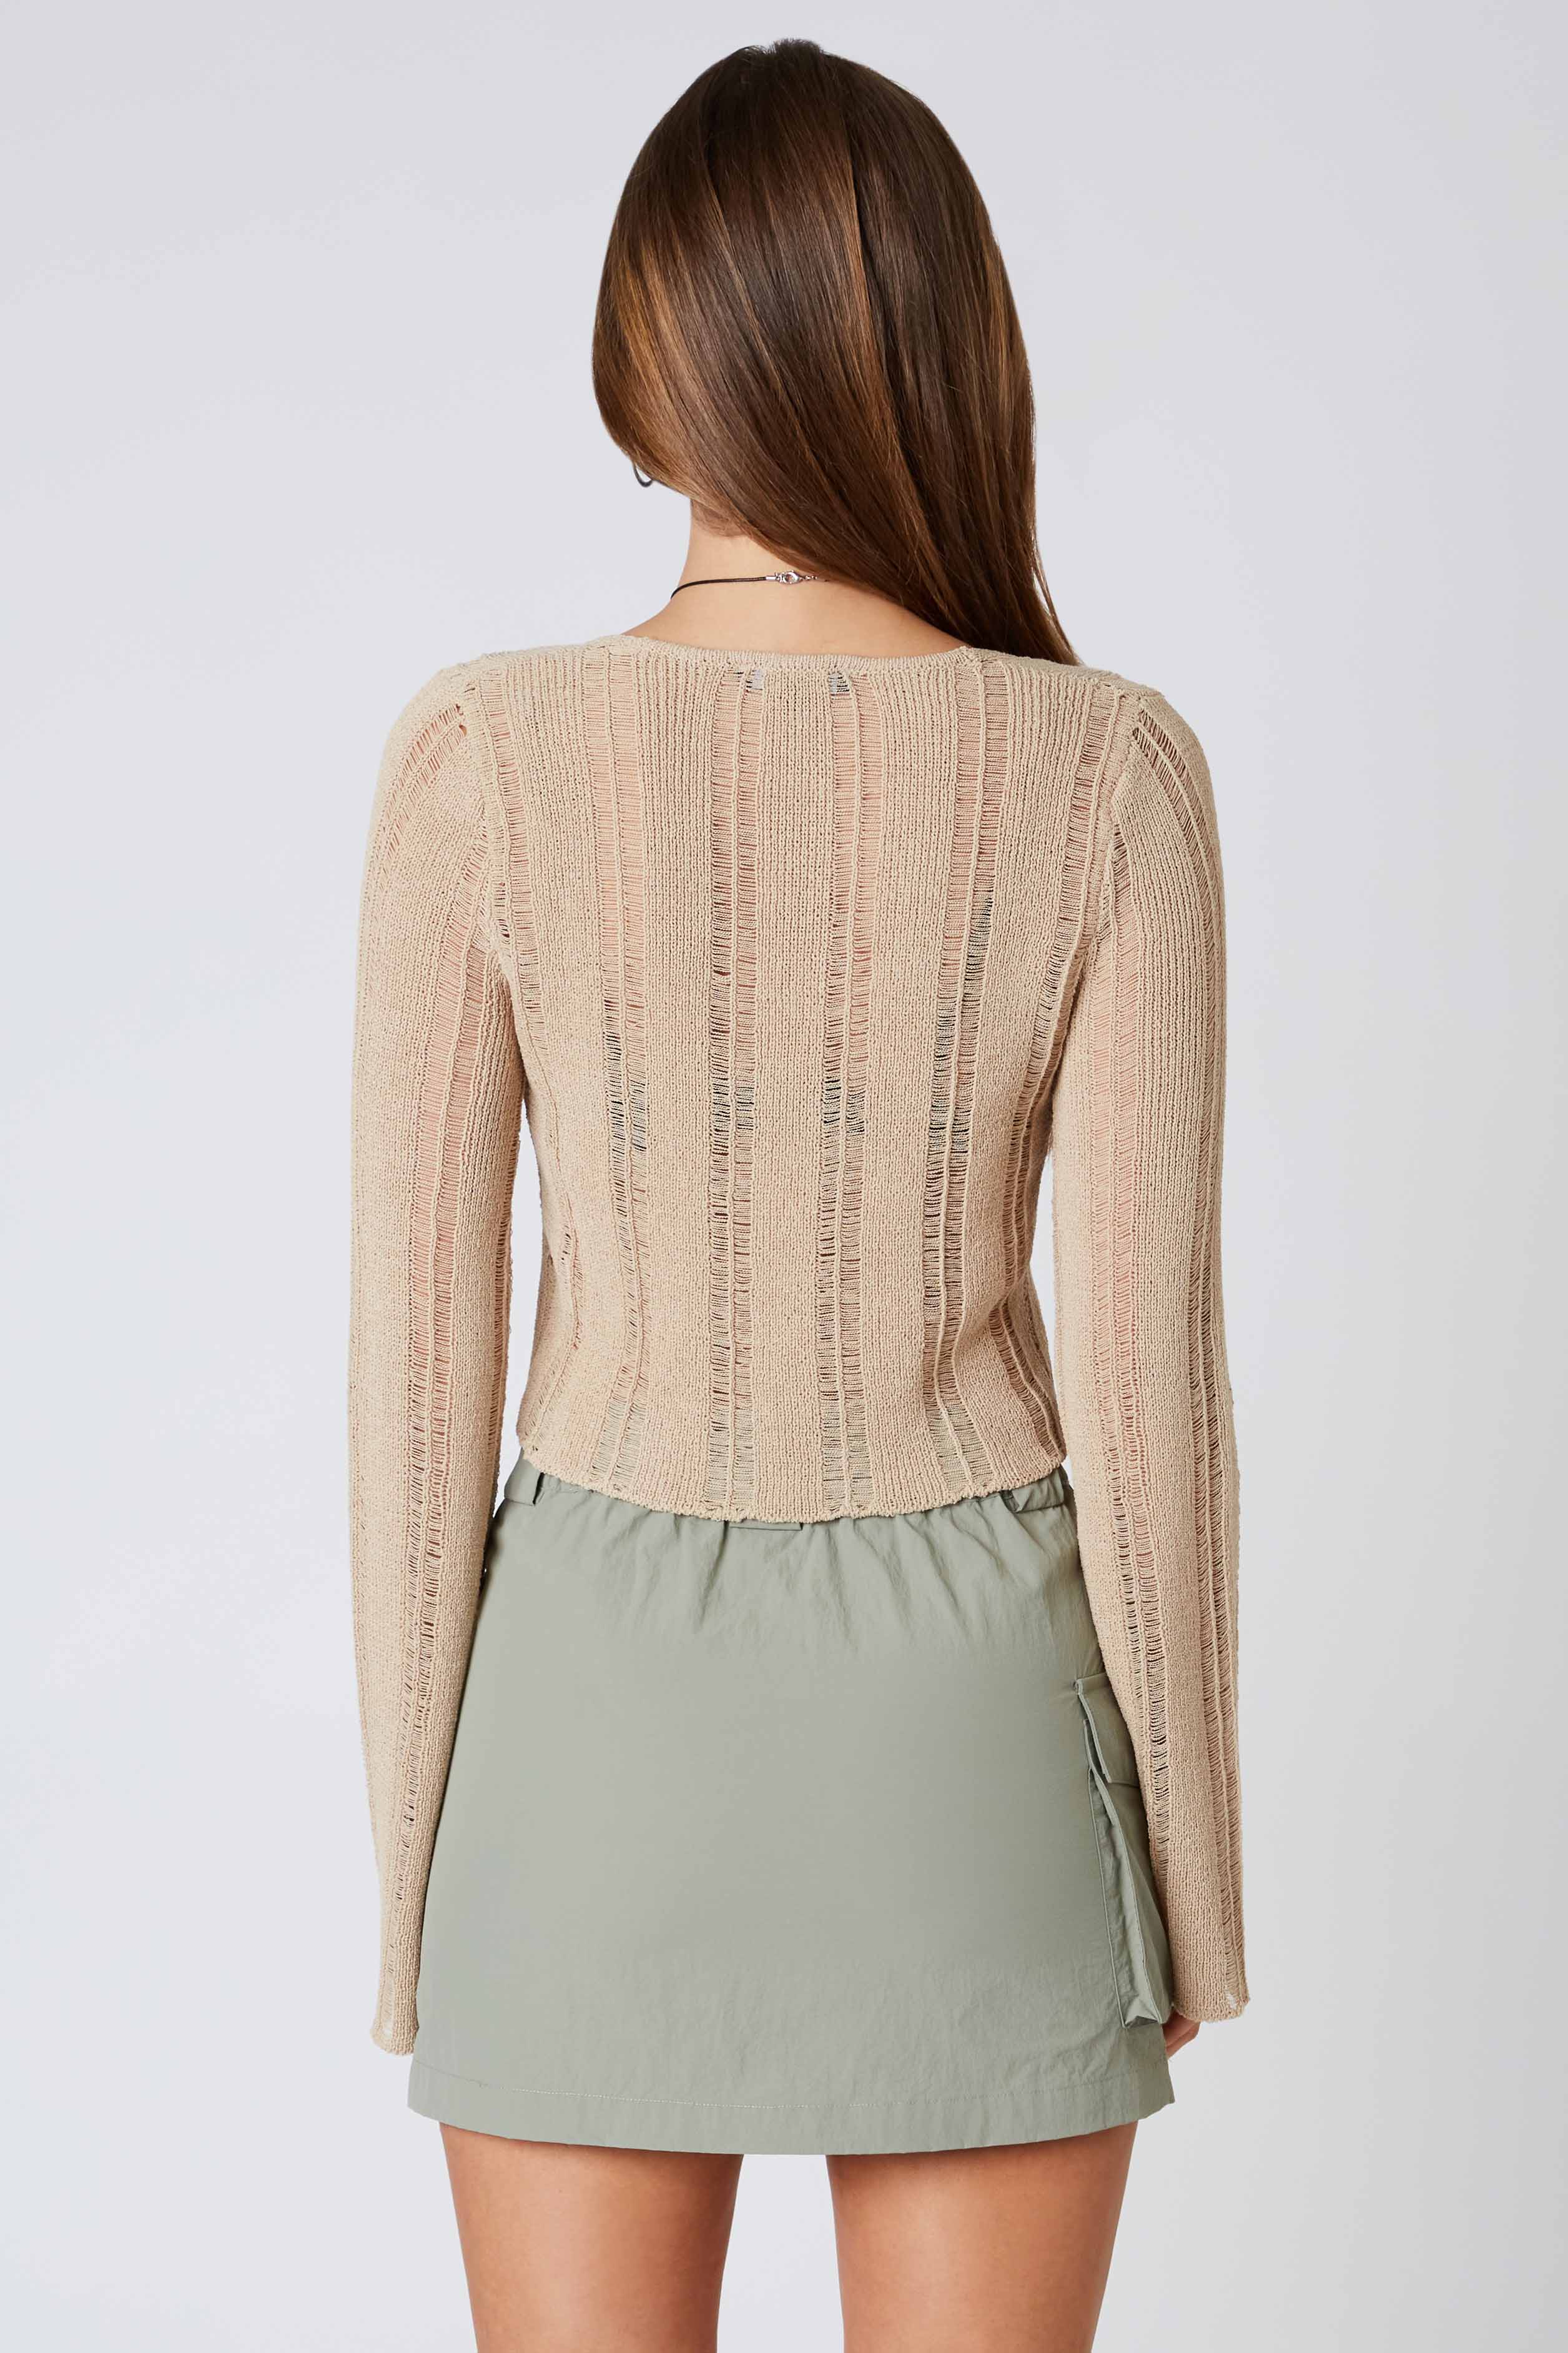 Crochet Knit Bell Sleeve Cardigan in Taupe Back View